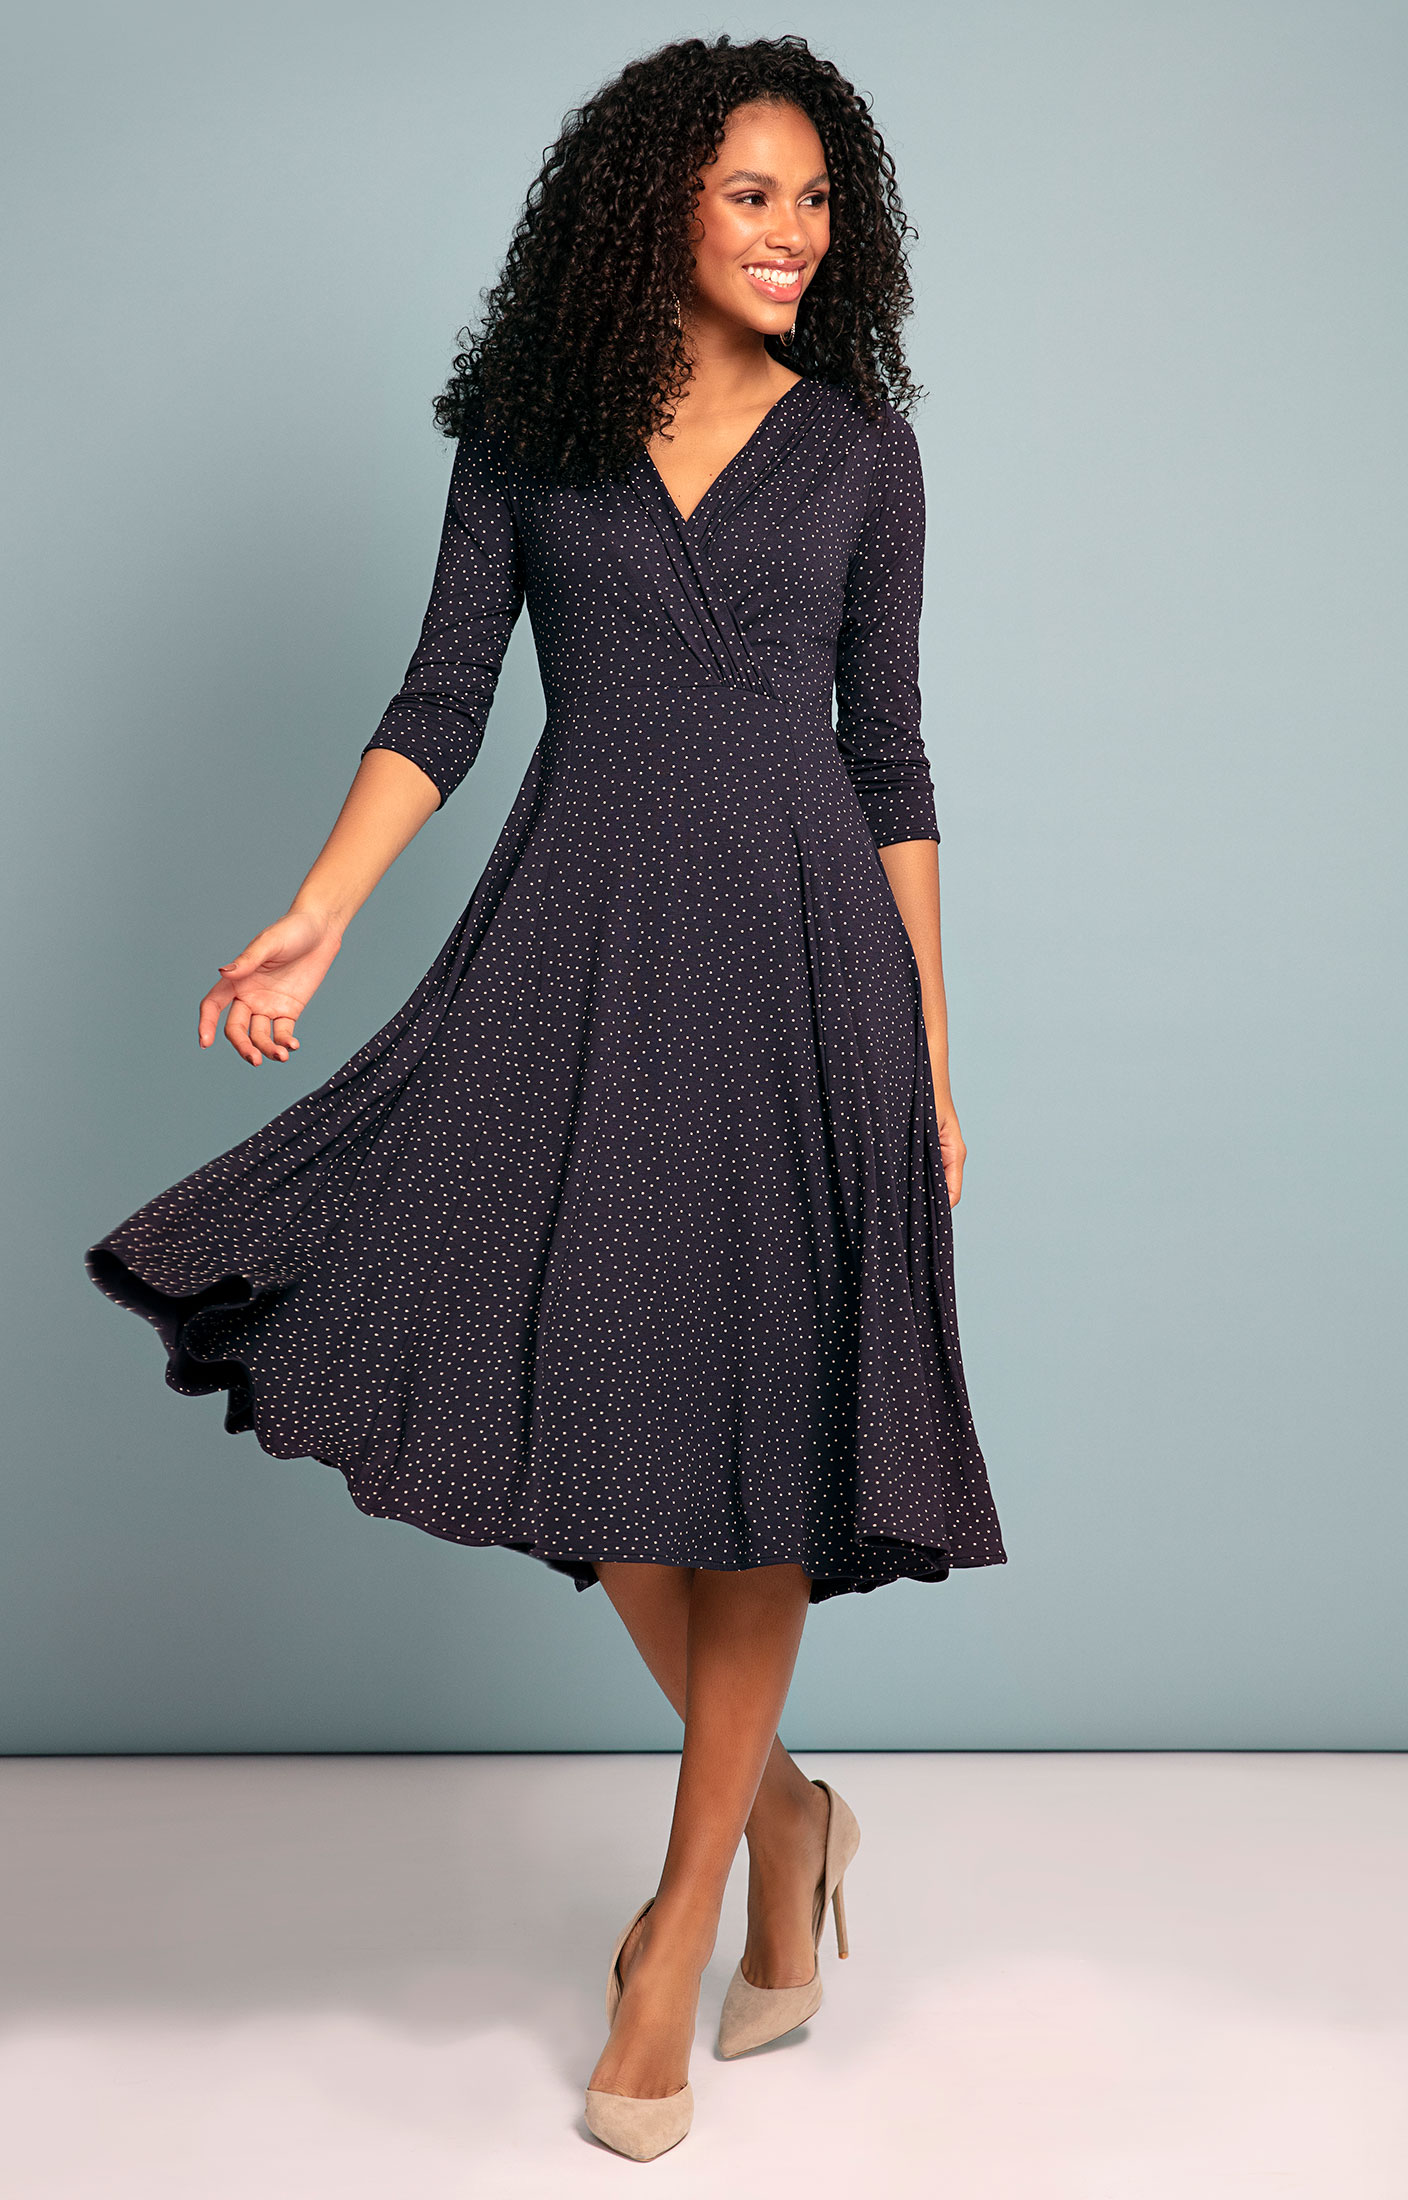 Annie Dress Navy - Wedding Dresses, Evening Wear and Party Clothes by Alie Street.